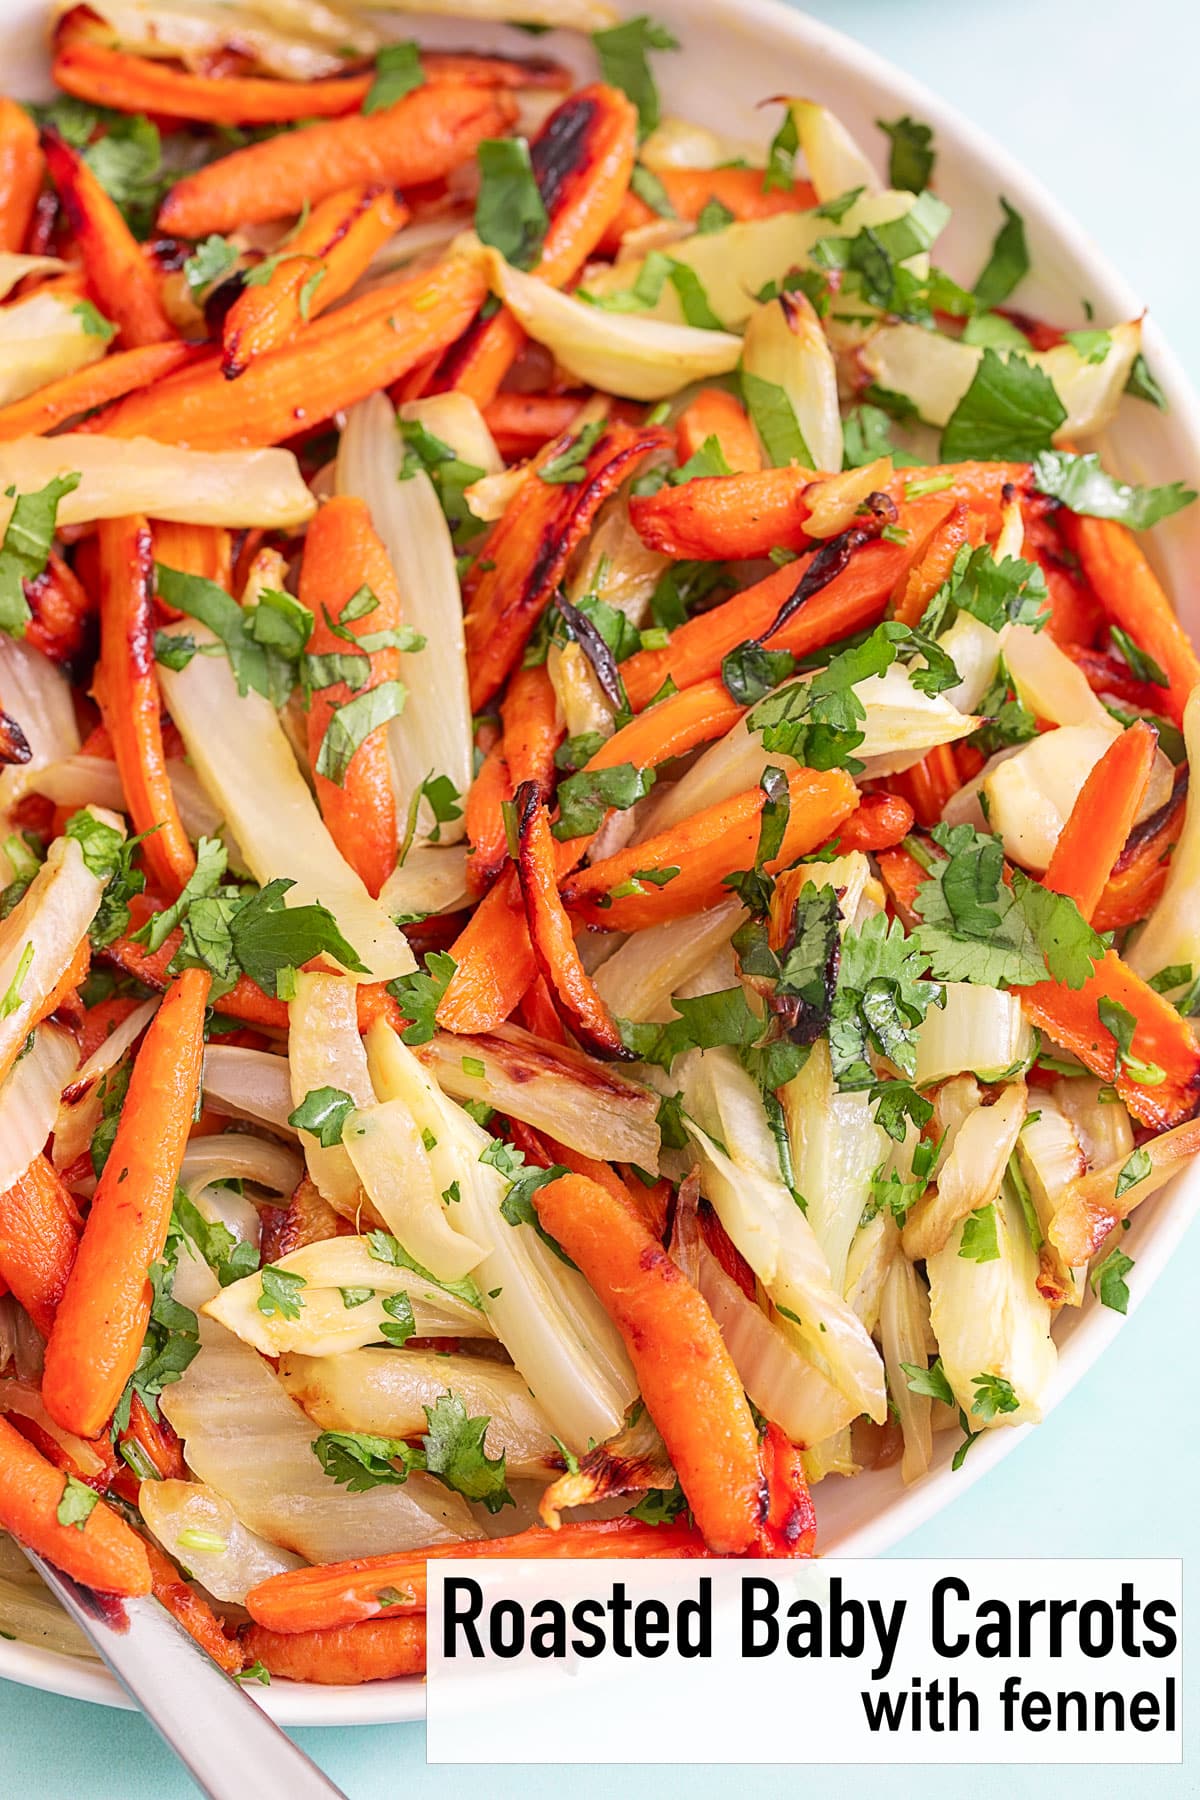 Top view of a bowl filled with carrots and fennel with cilantro garnish - Roasted baby carrots